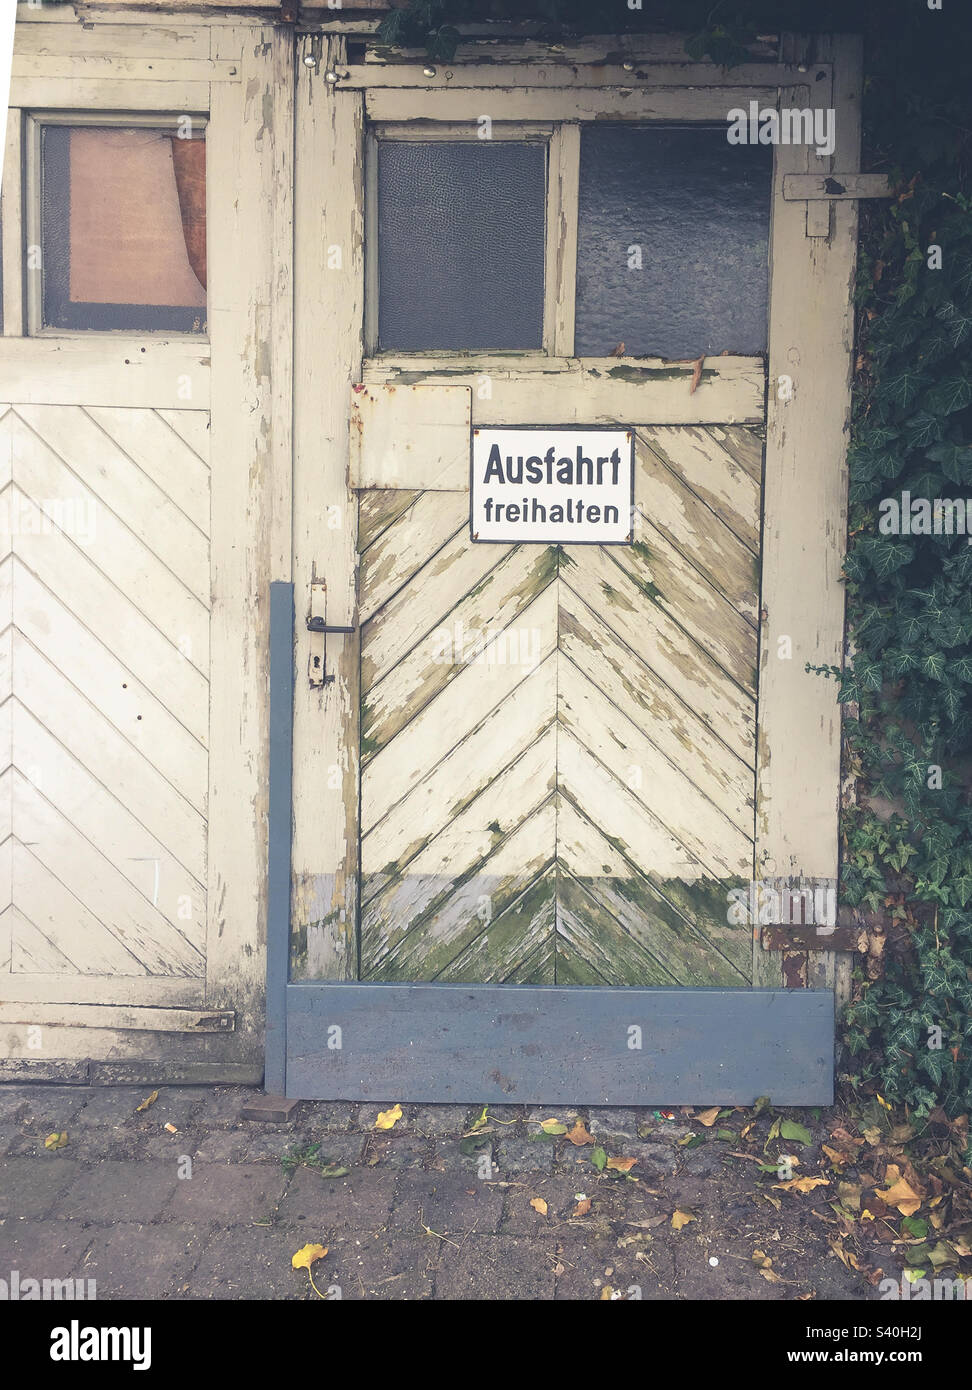 Old wooden door with sign with German text: Ausfahrt freihalten which translates into Keep the exit clear in English language Stock Photo